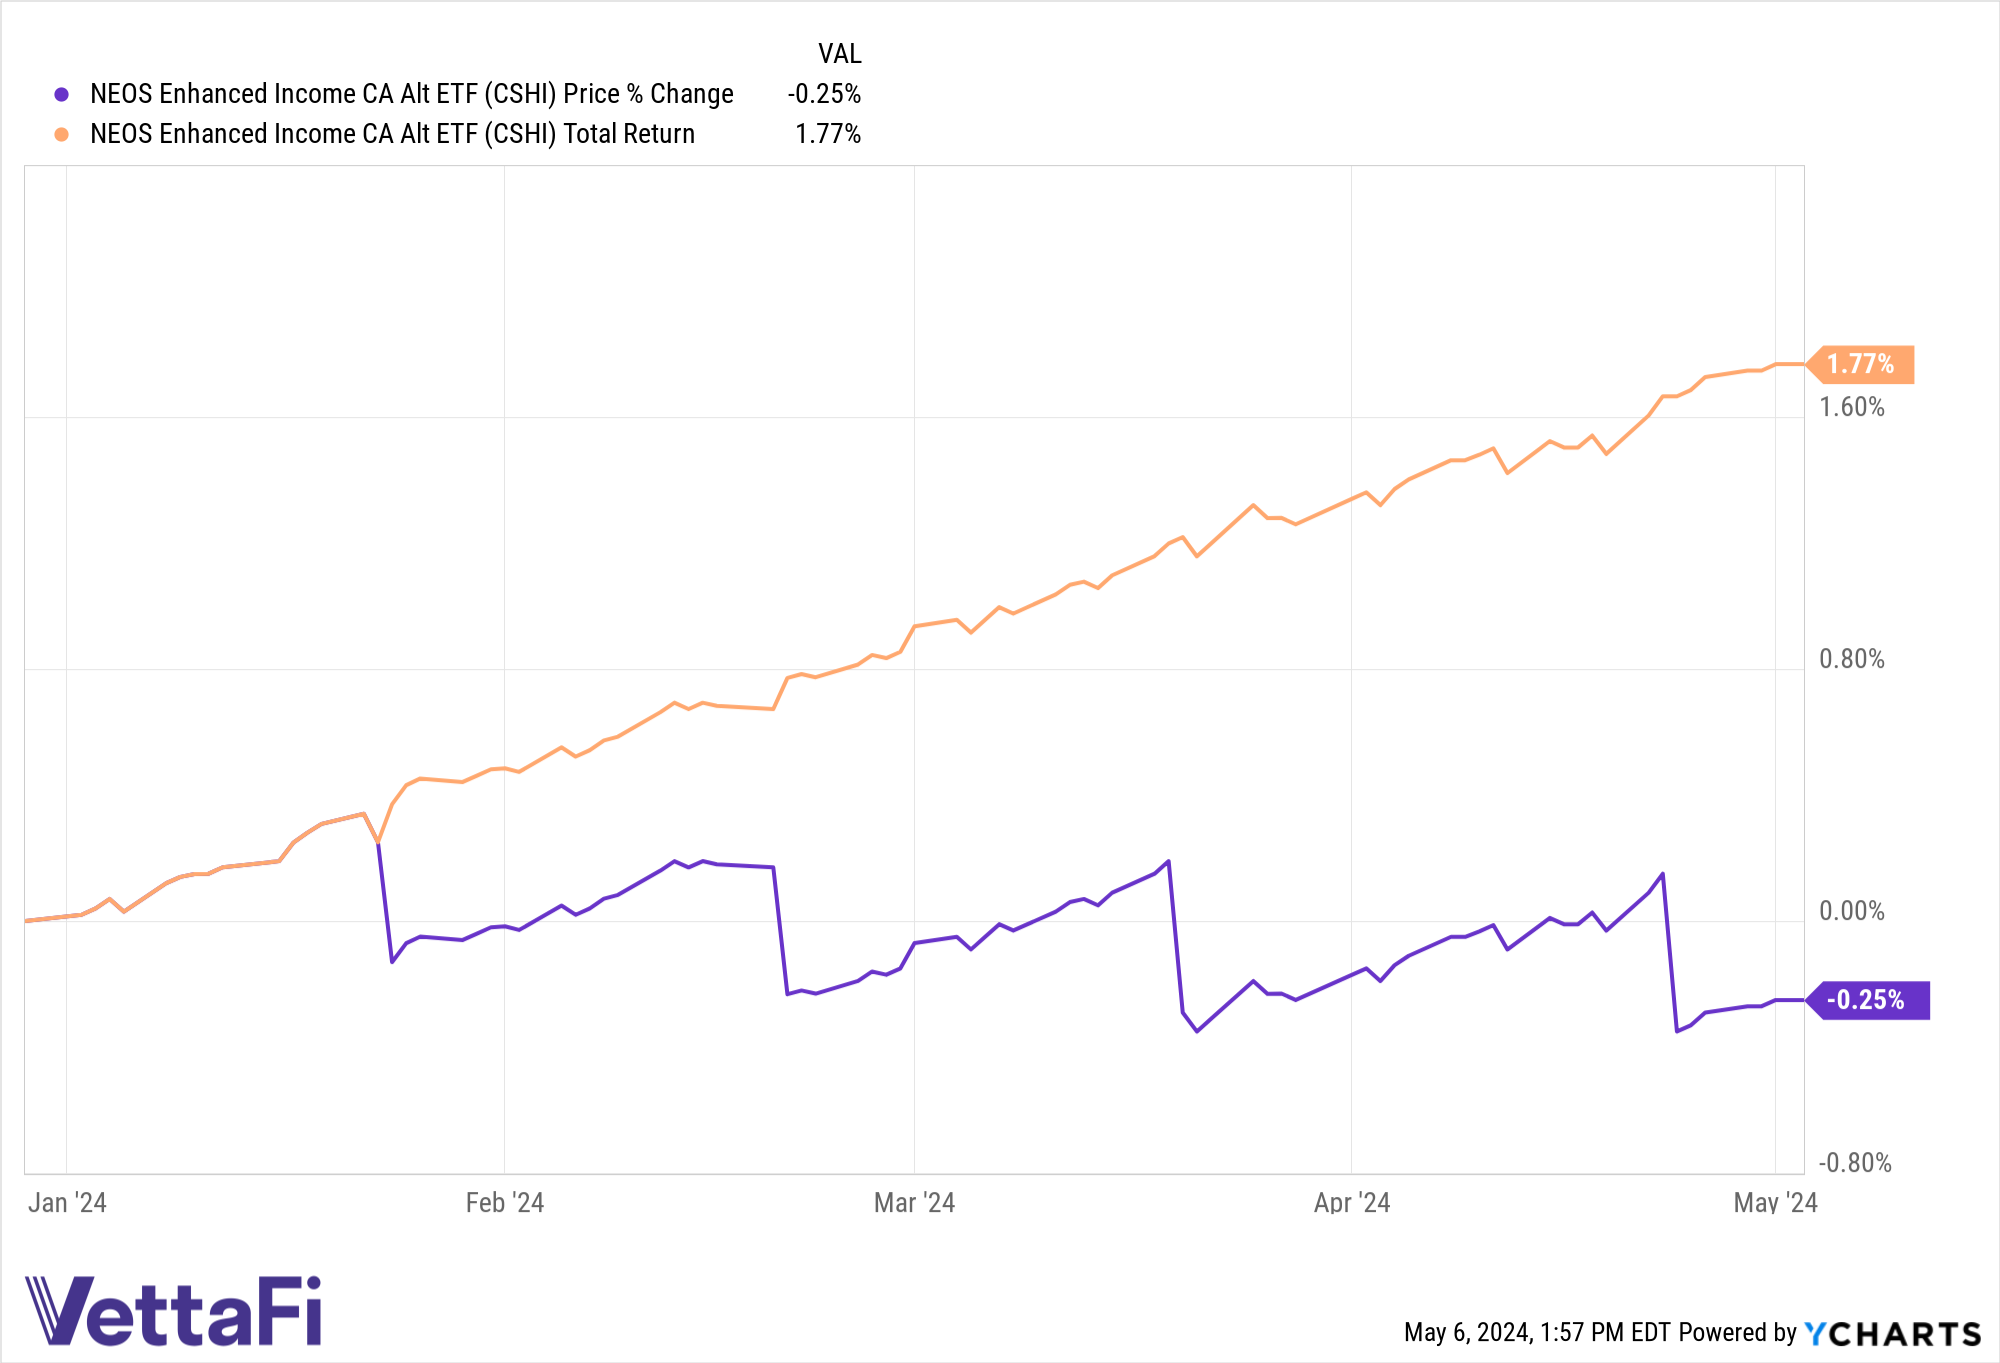 Price and total returns YTD for short-duration ETF CSHI.